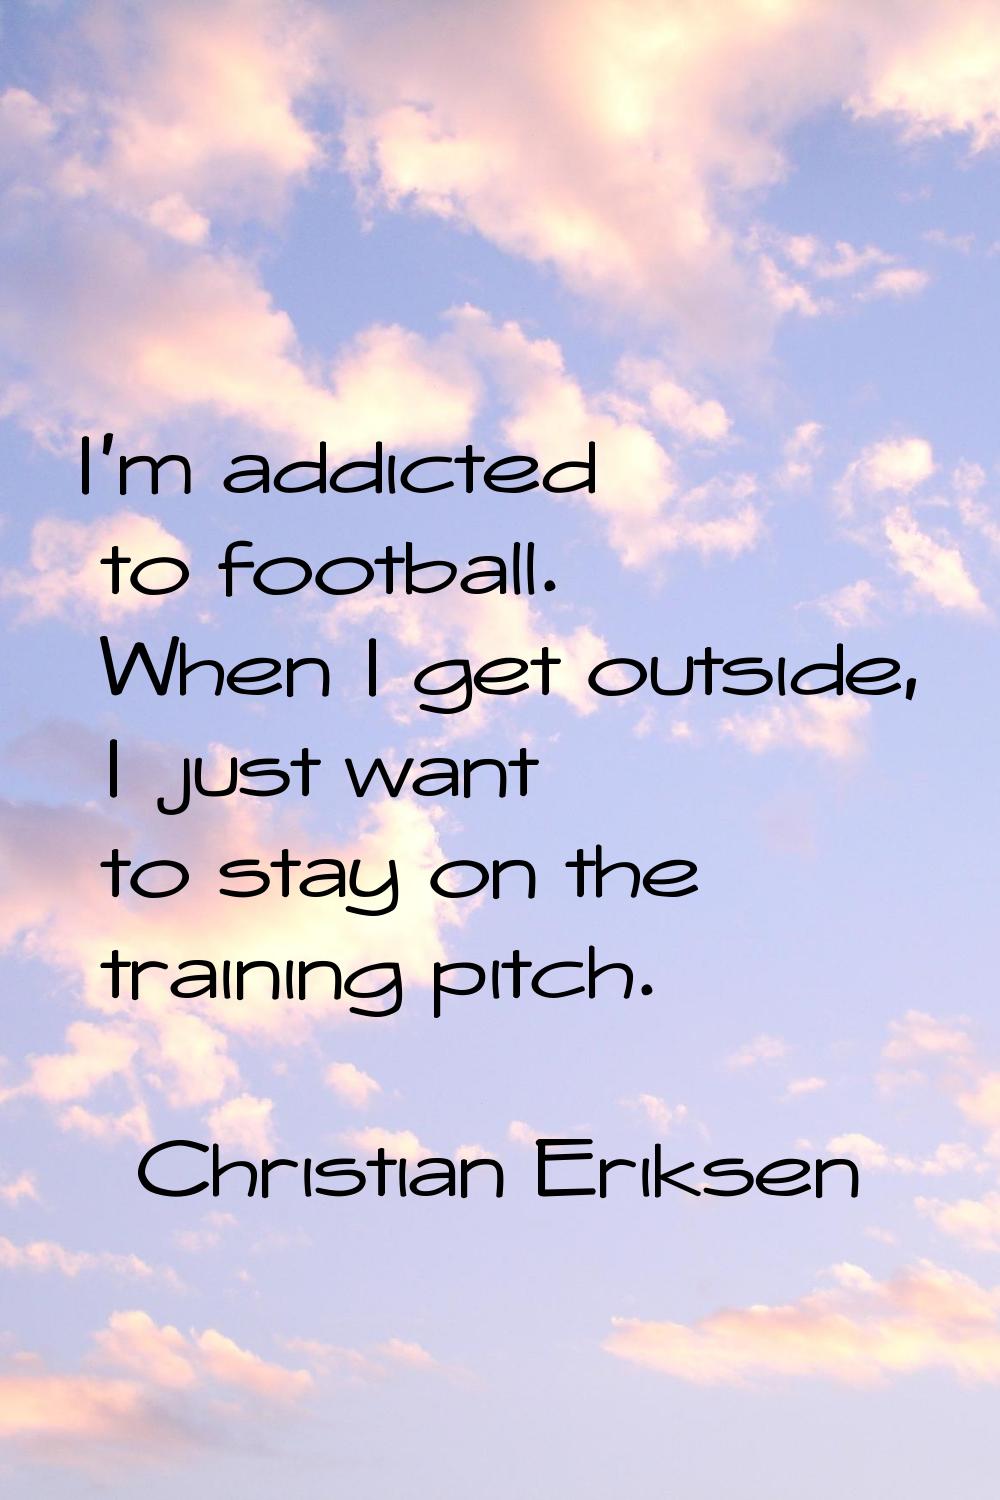 I'm addicted to football. When I get outside, I just want to stay on the training pitch.